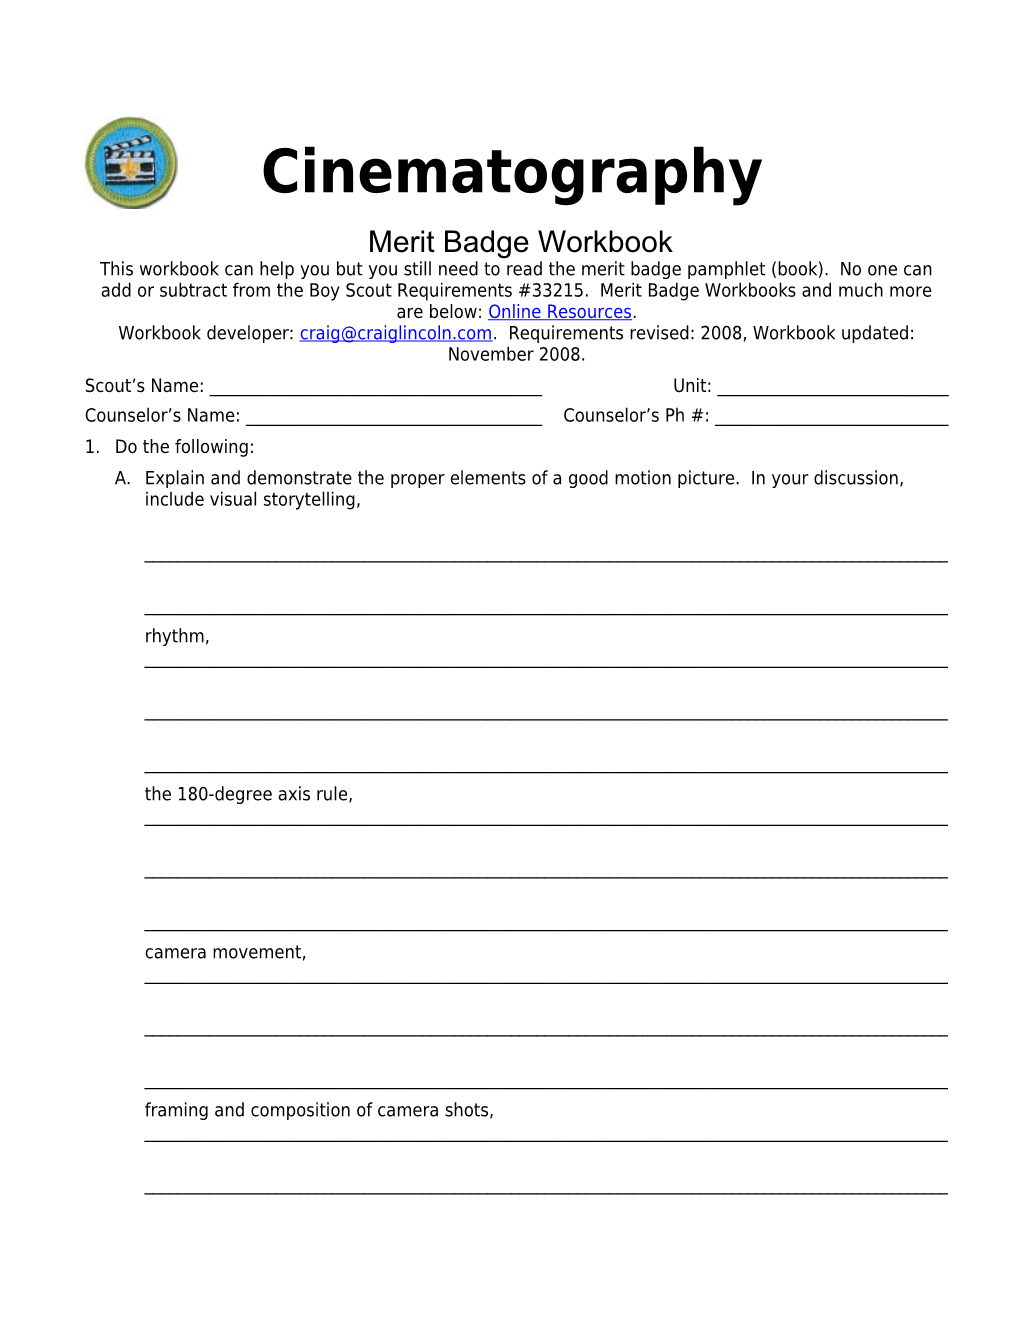 Cinematography P. 2 Merit Badge Workbook Scout's Name: ______